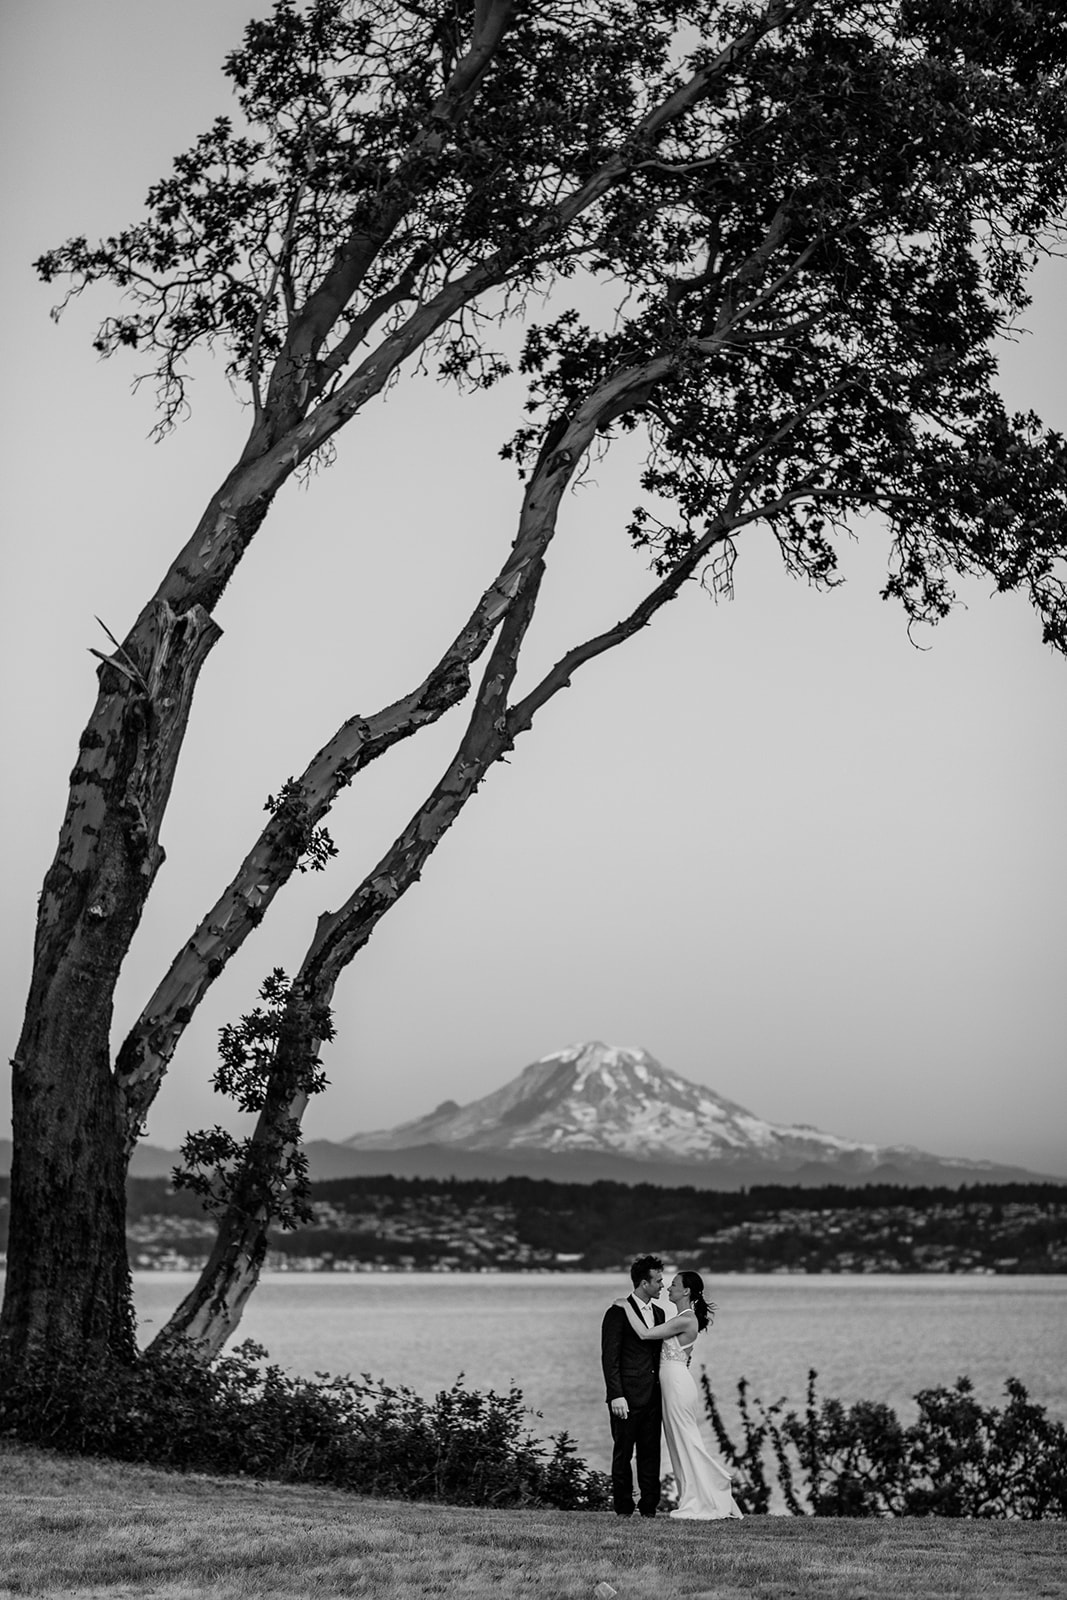 Bride and groom standing under a tree at a water-front on Vashon with Mount Rainier visible in the distant.